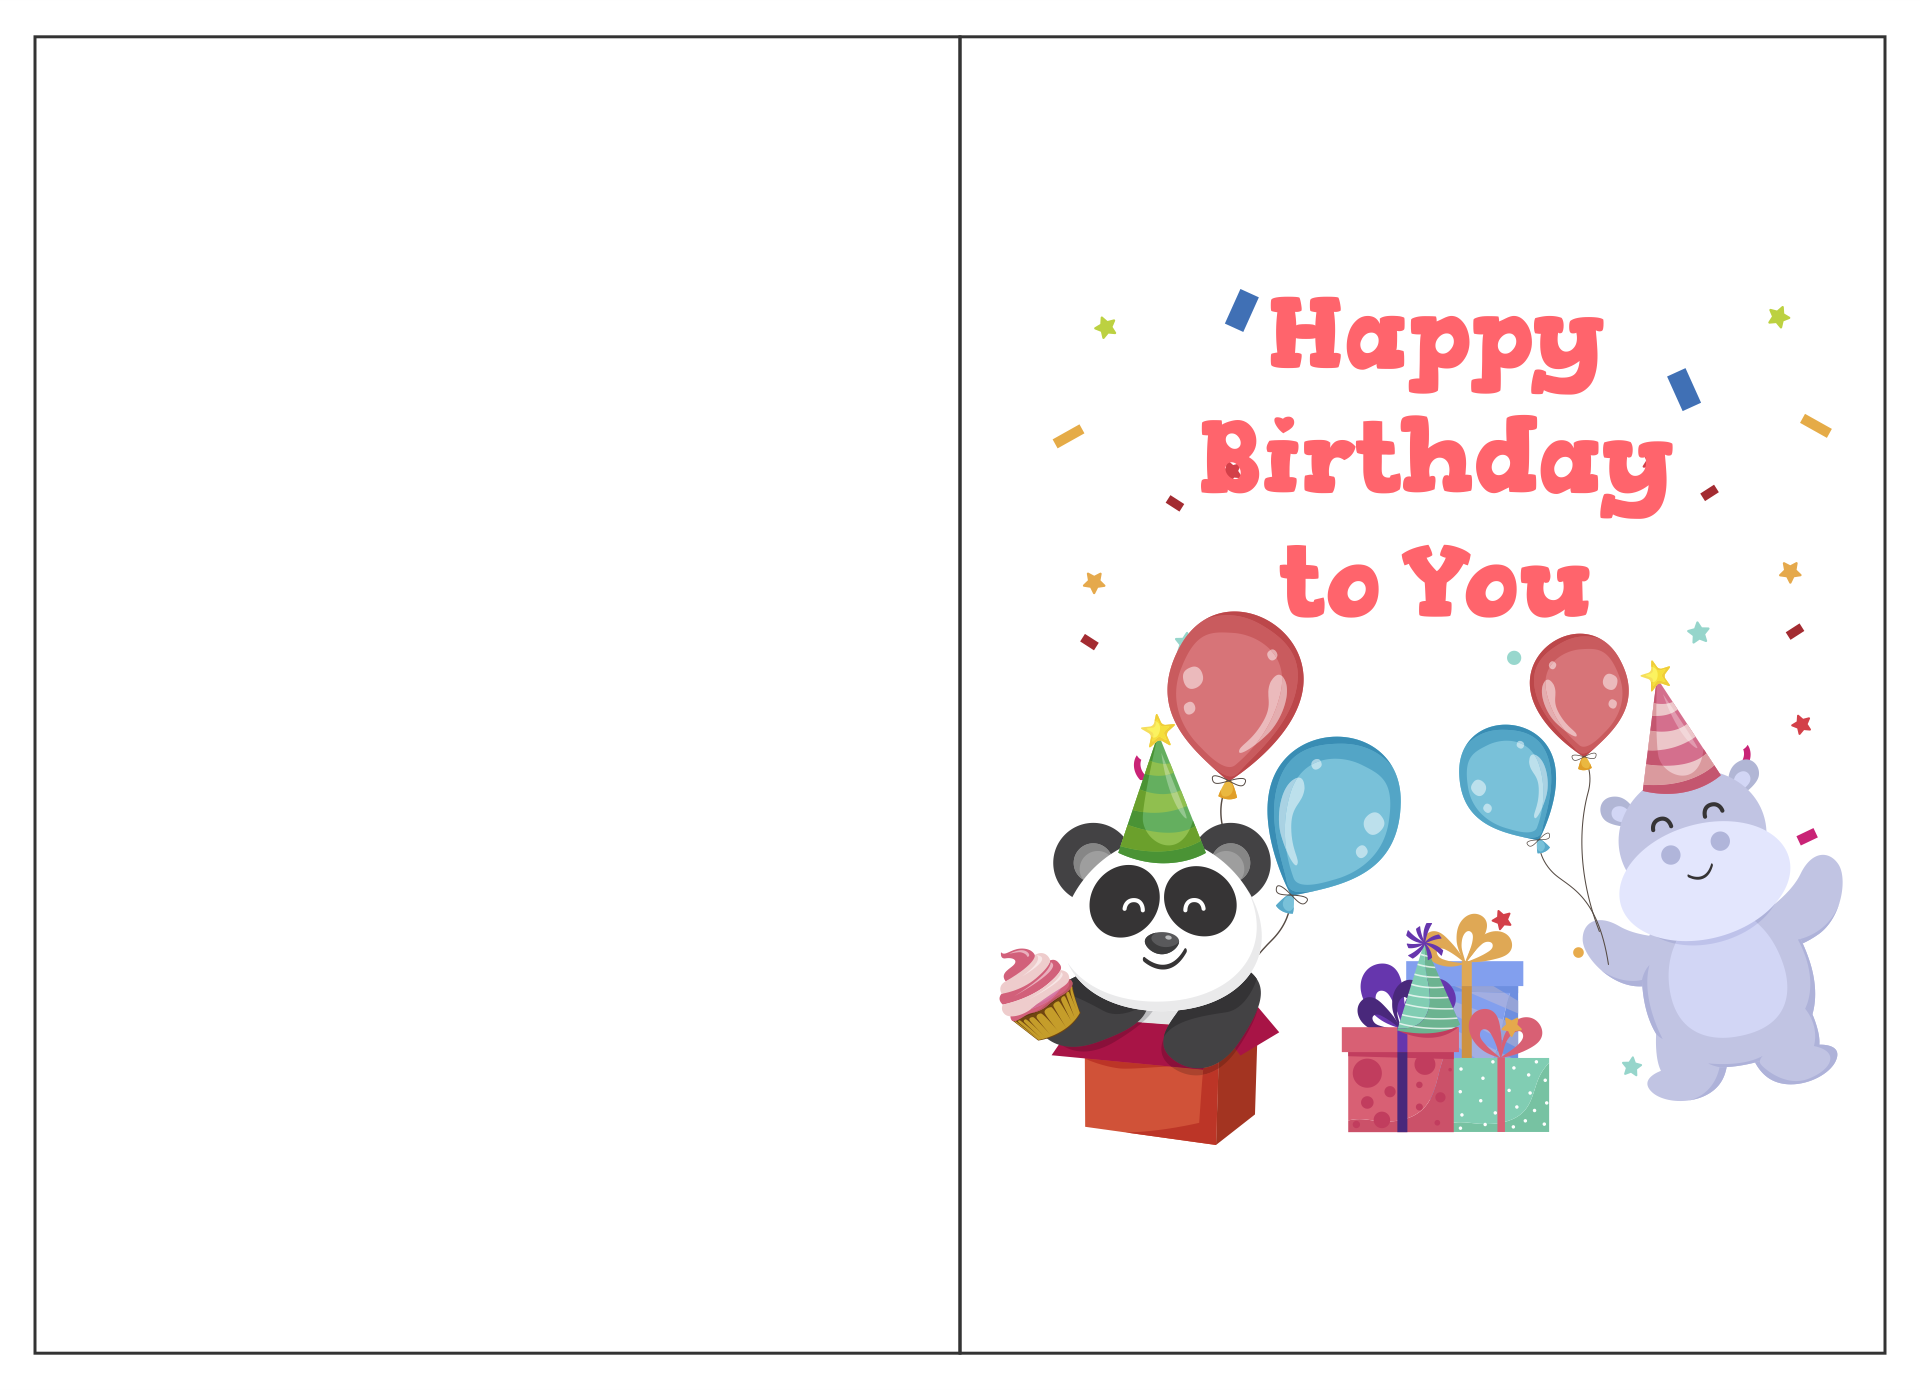 4 Best Images of Printable Folding Birthday Cards For Wife - Printable